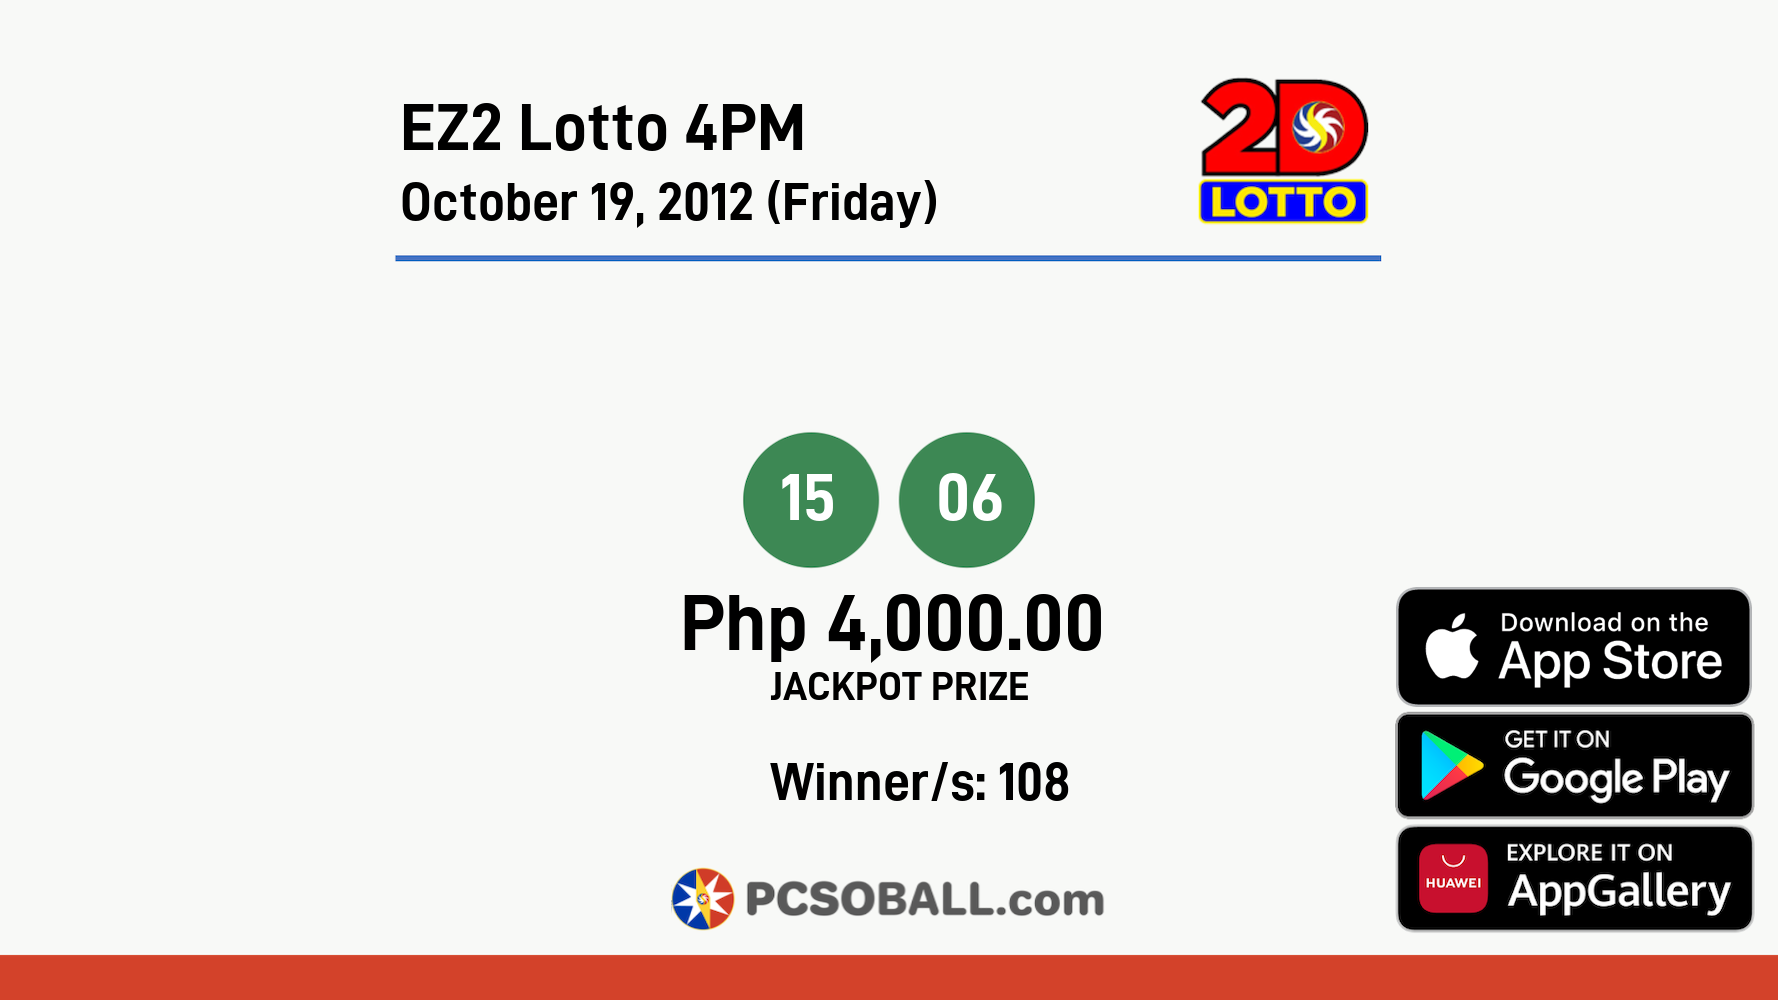 EZ2 Lotto 4PM October 19, 2012 (Friday) Result